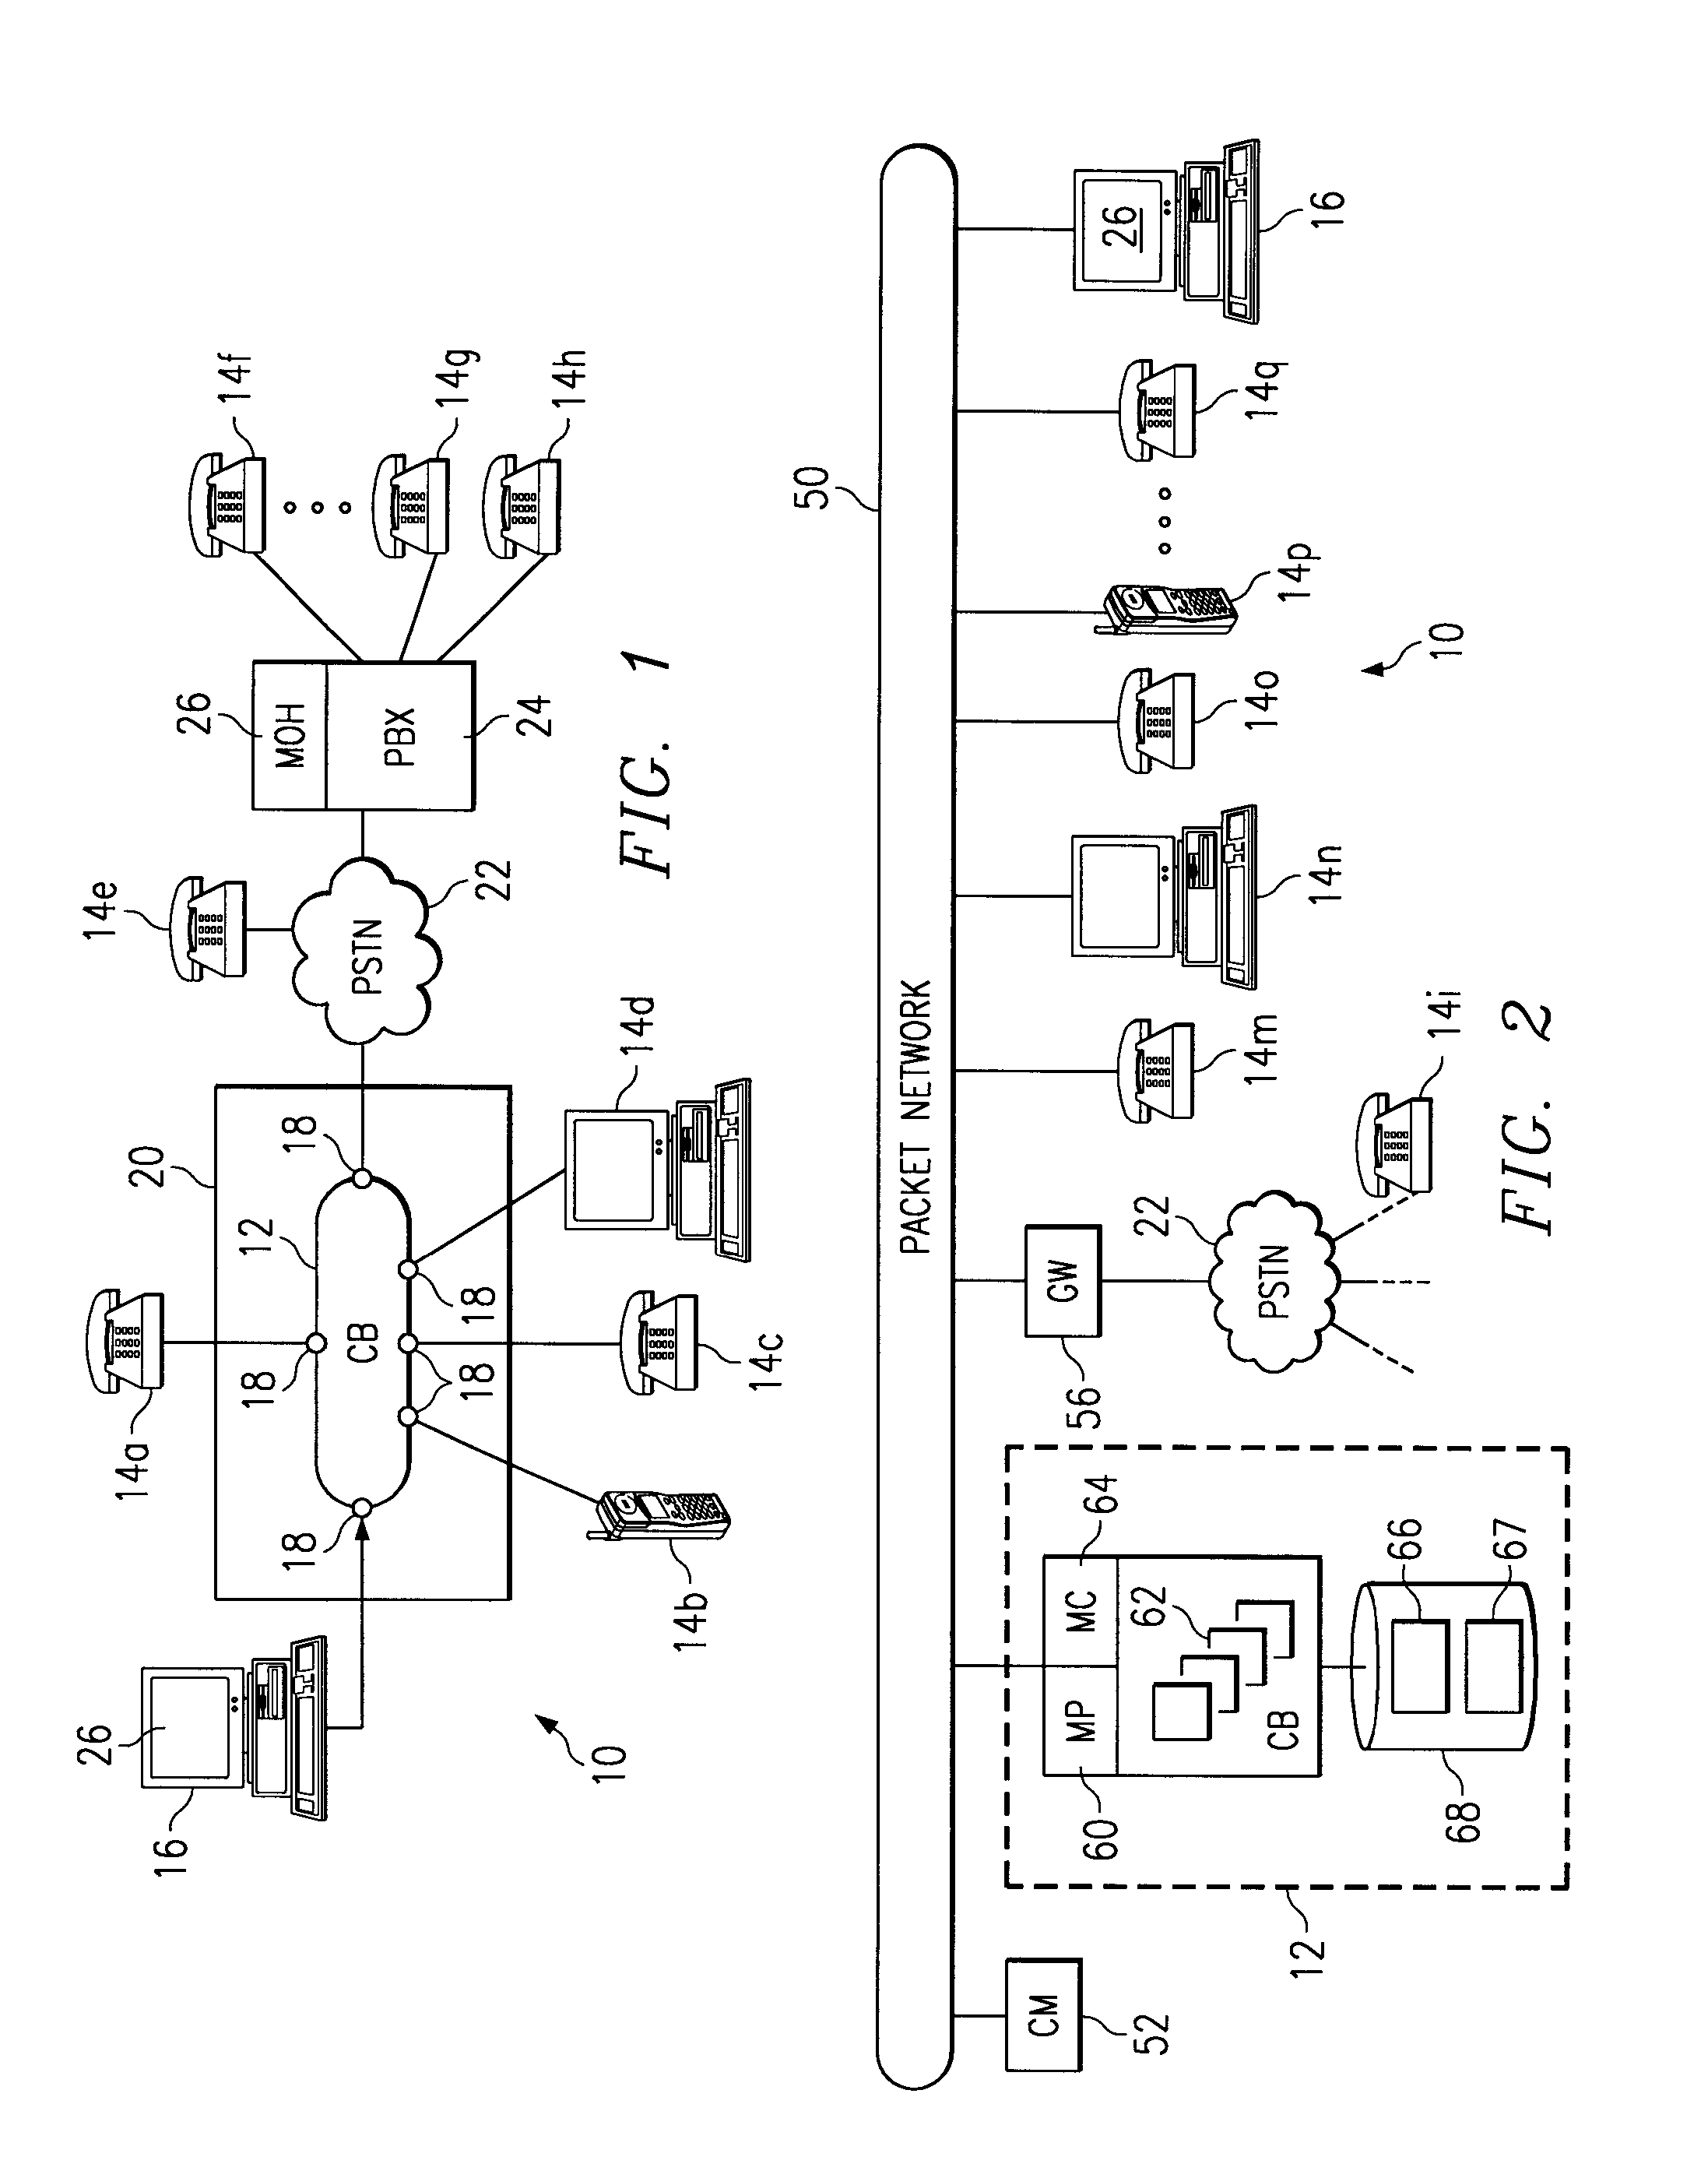 Apparatus and method for controlling an audio conference